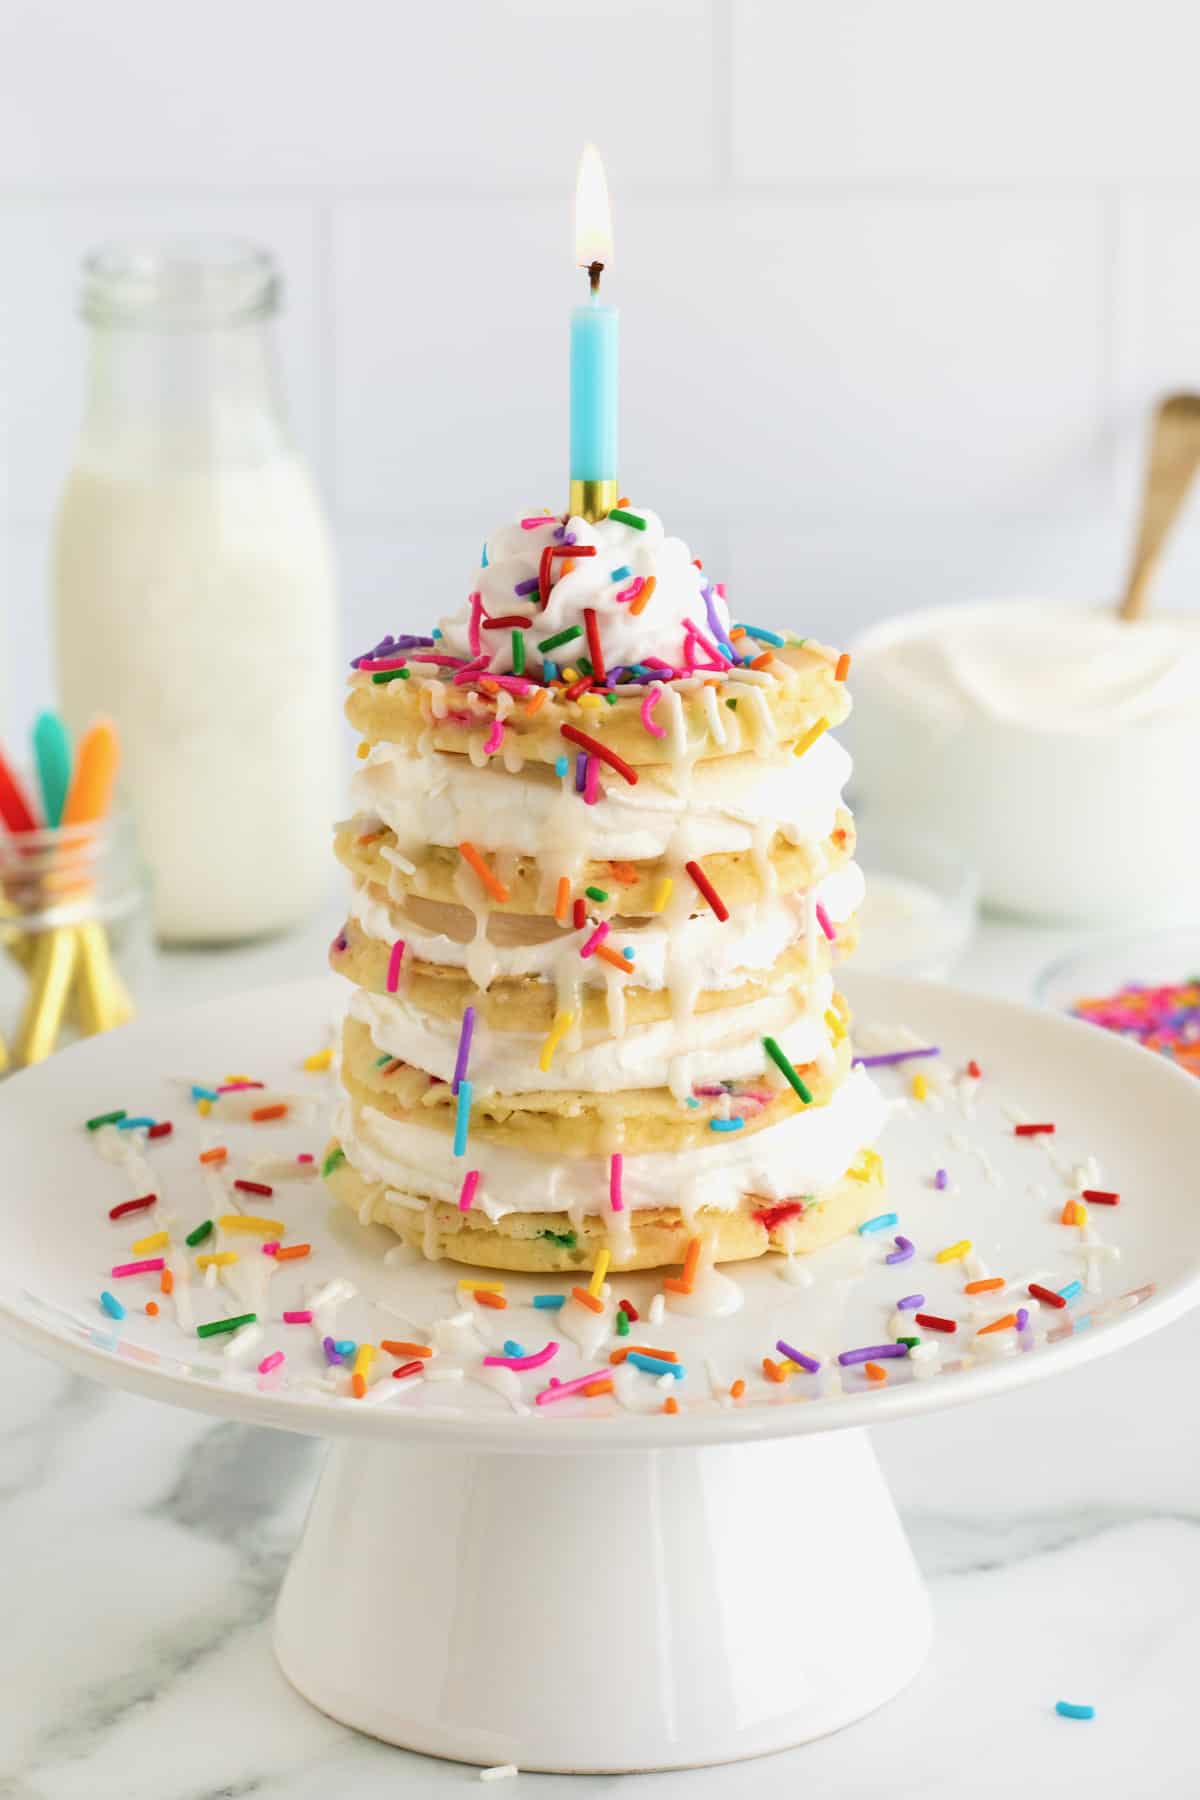 Five homemade pancakes with sprinkles in the batter with whipped topping between to make a layer cake with one candle on top.